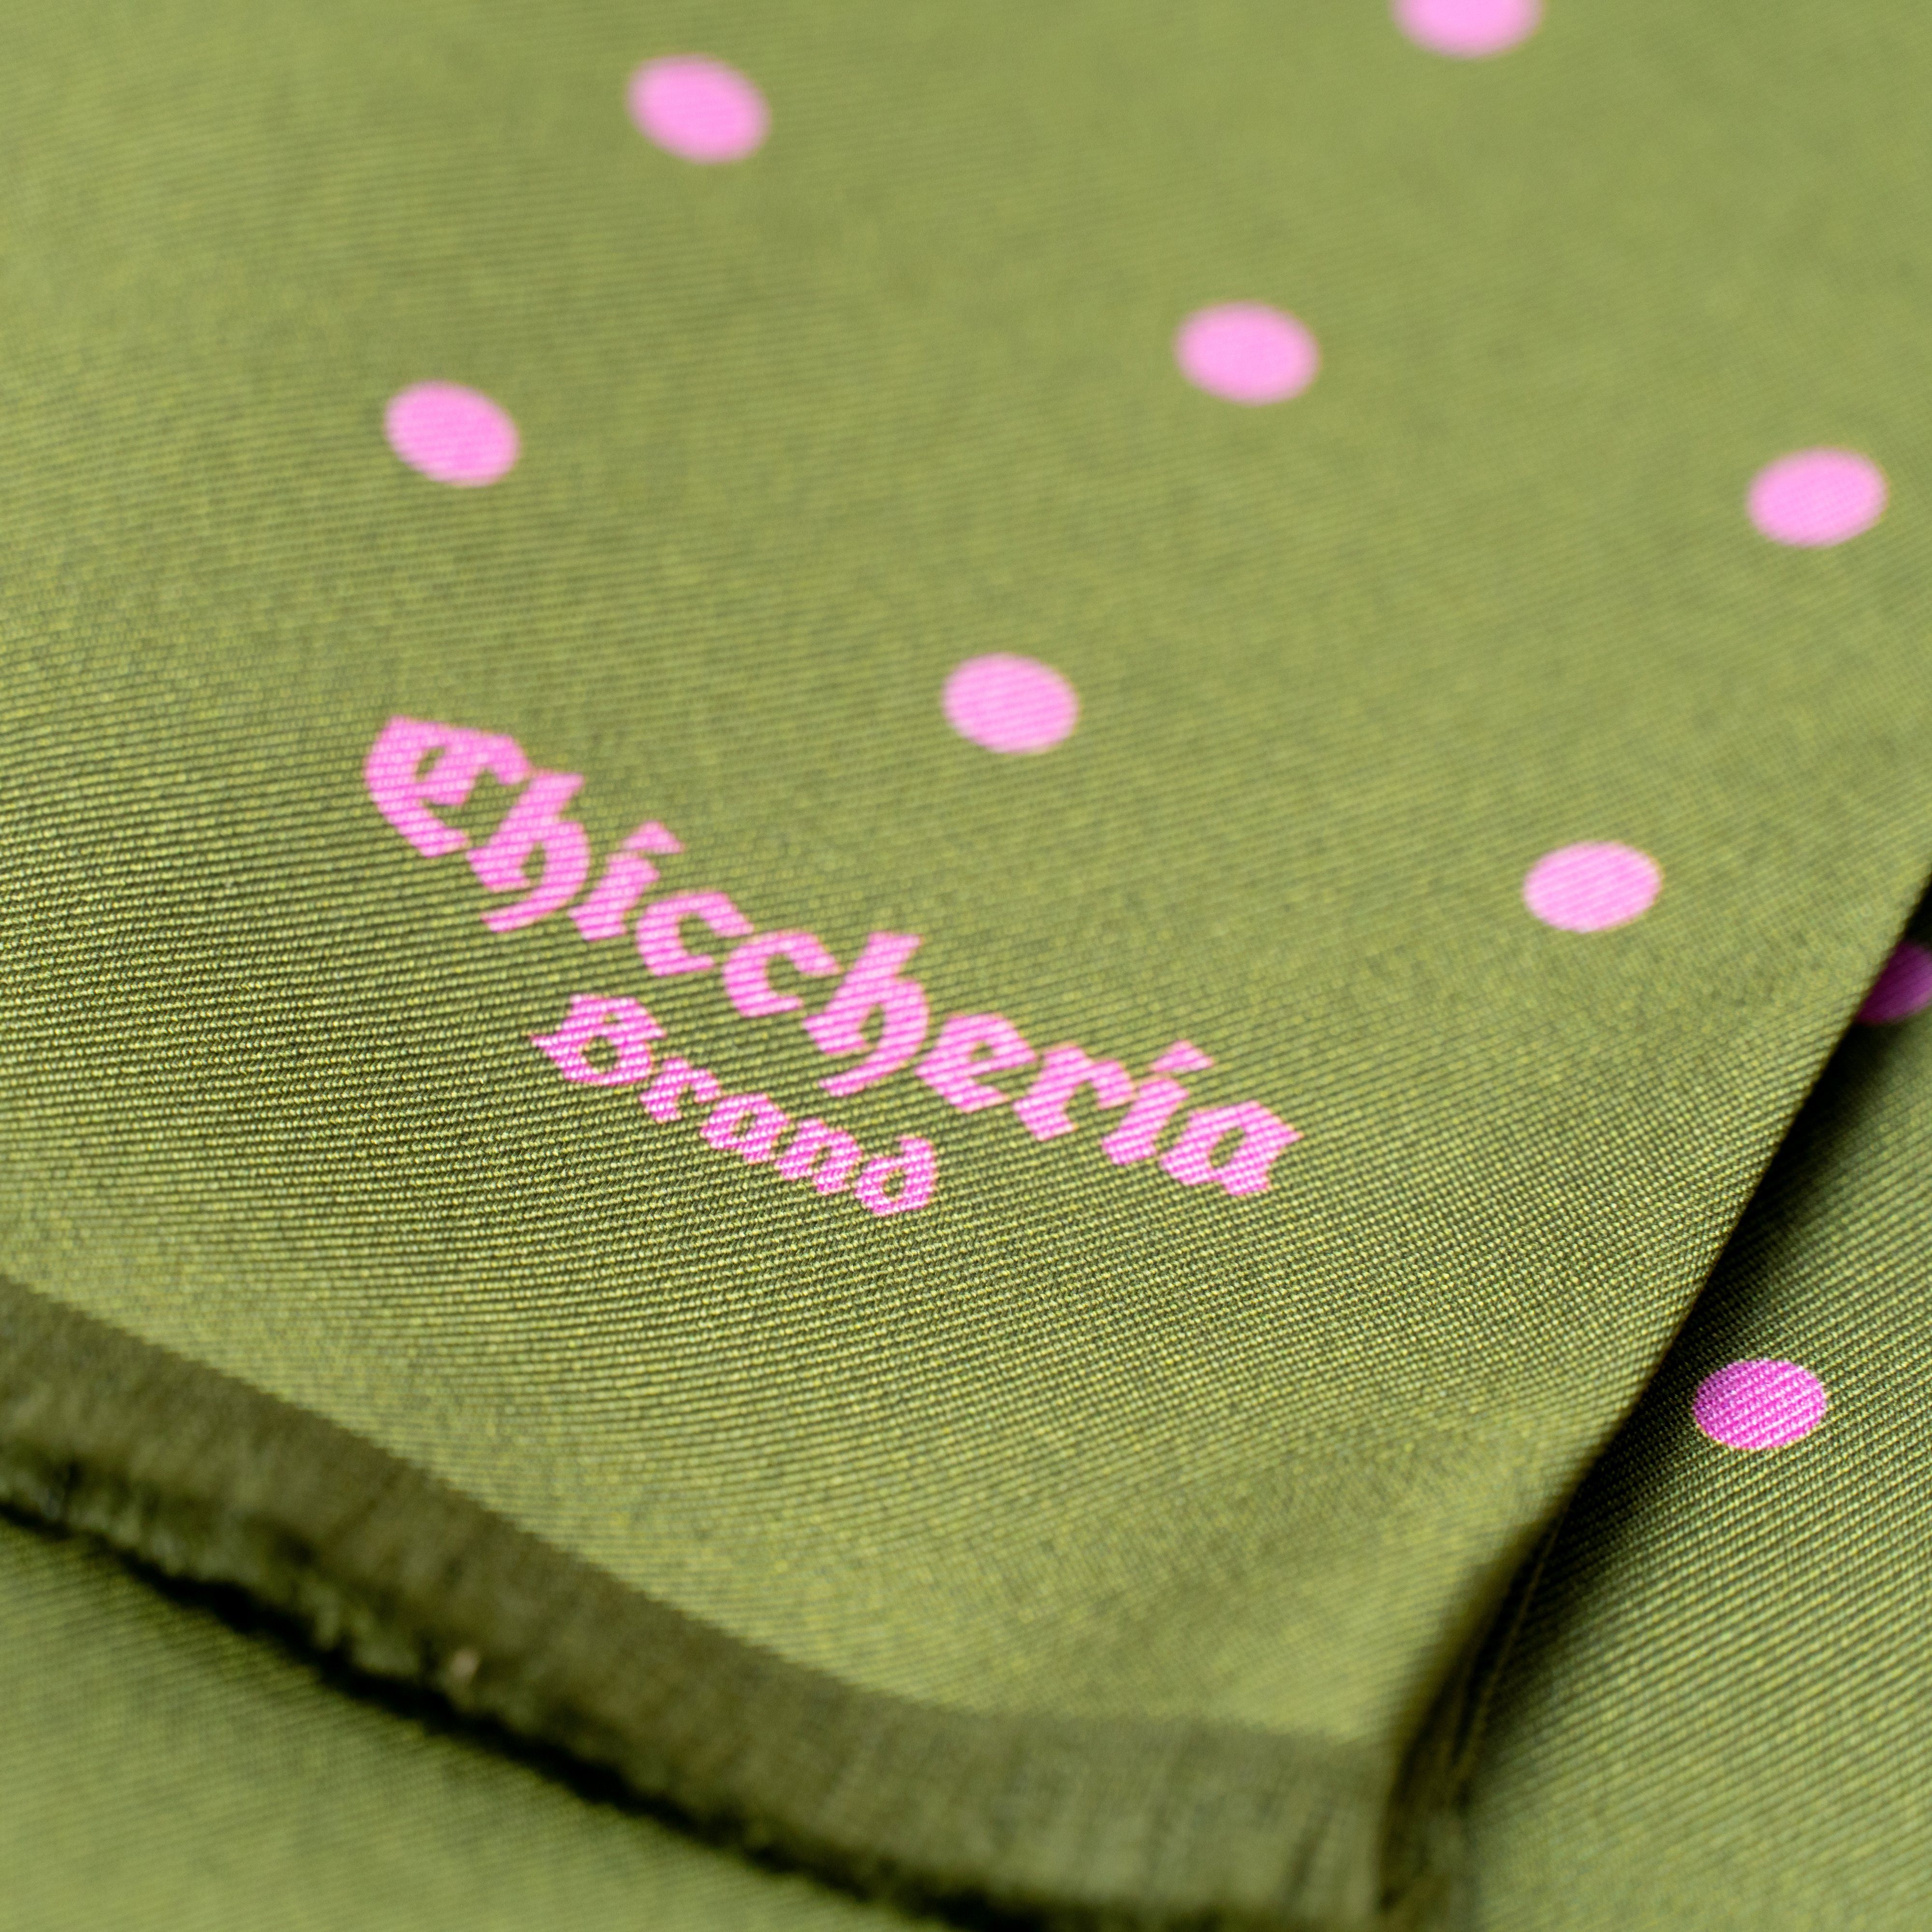 Chiccheria Brand Seidenschal Oliv in BIG-DOTS, Made Italy